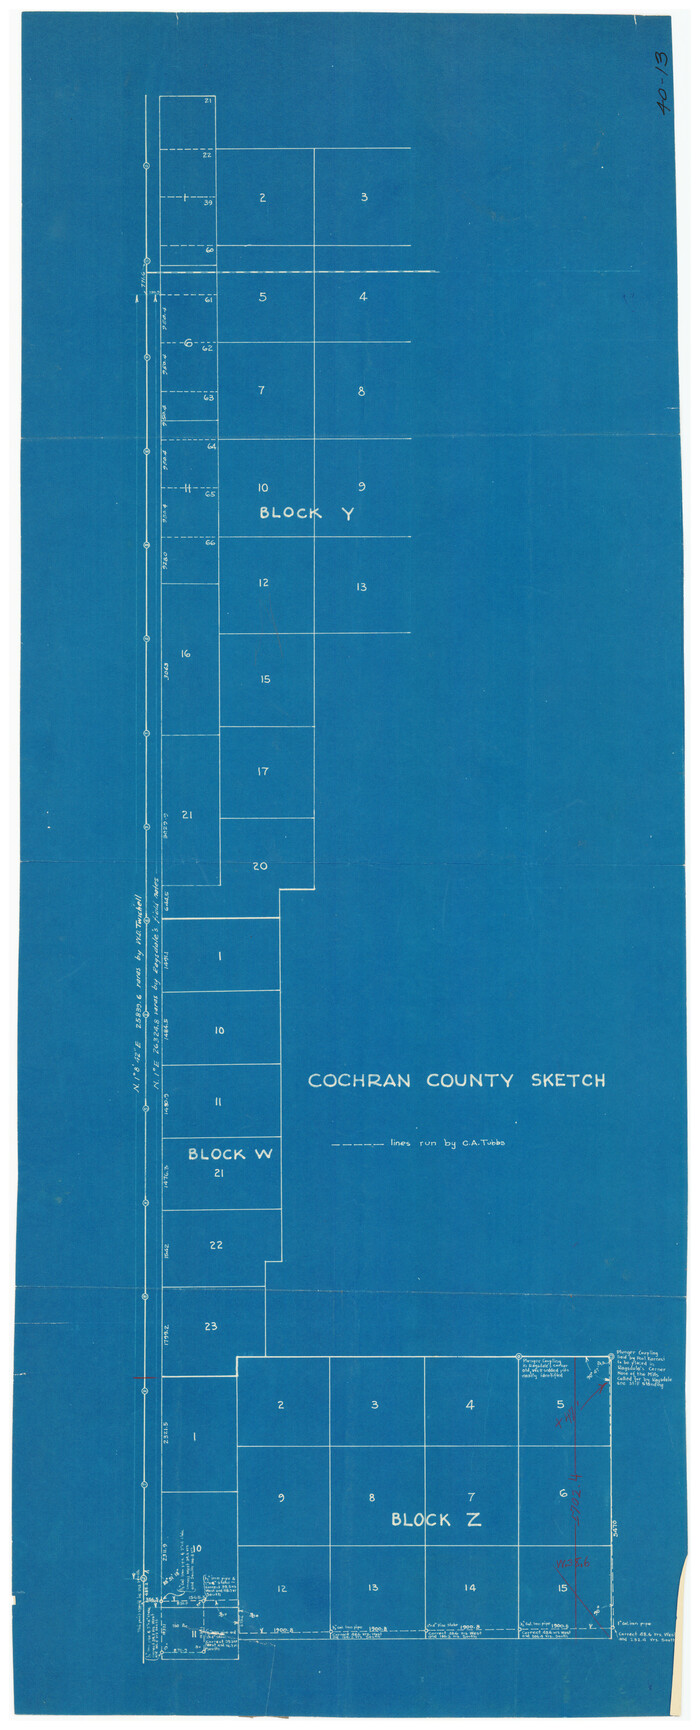 90443, Cochran County Sketch [showing lines run by C. A. Tubbs], Twichell Survey Records